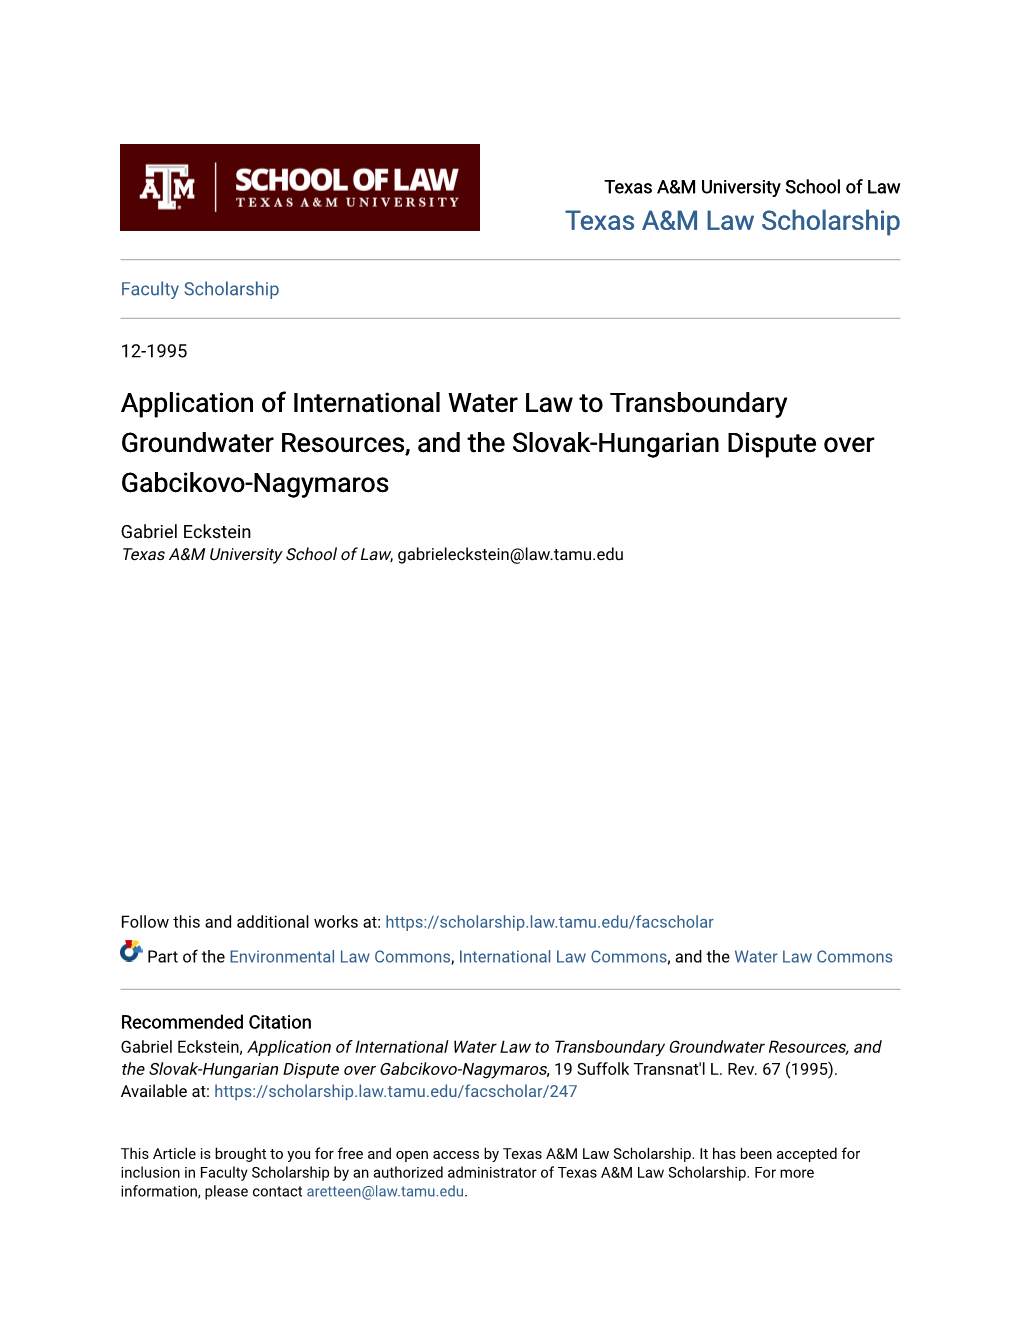 Application of International Water Law to Transboundary Groundwater Resources, and the Slovak-Hungarian Dispute Over Gabcikovo-Nagymaros